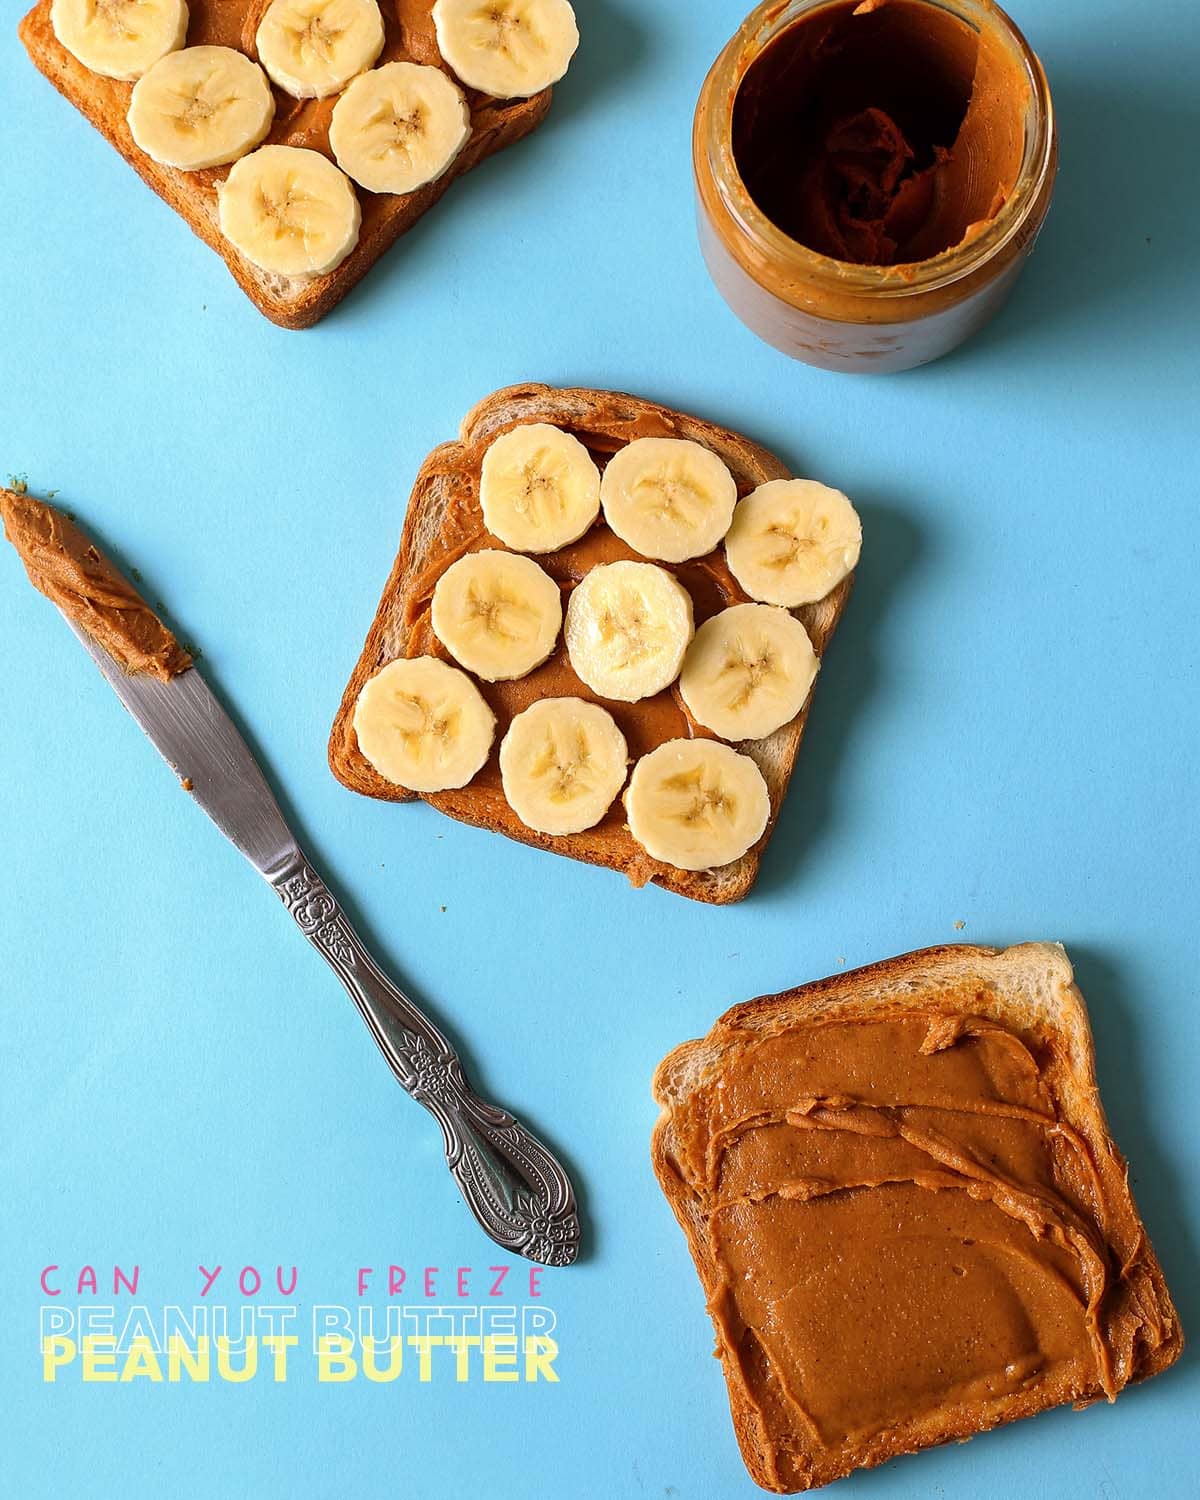 If you freeze peanut butter, it will keep for six months. You can get the same results by freezing it without removing its packaging. You can separate it into portions, seal it, and then freeze it as an alternative.